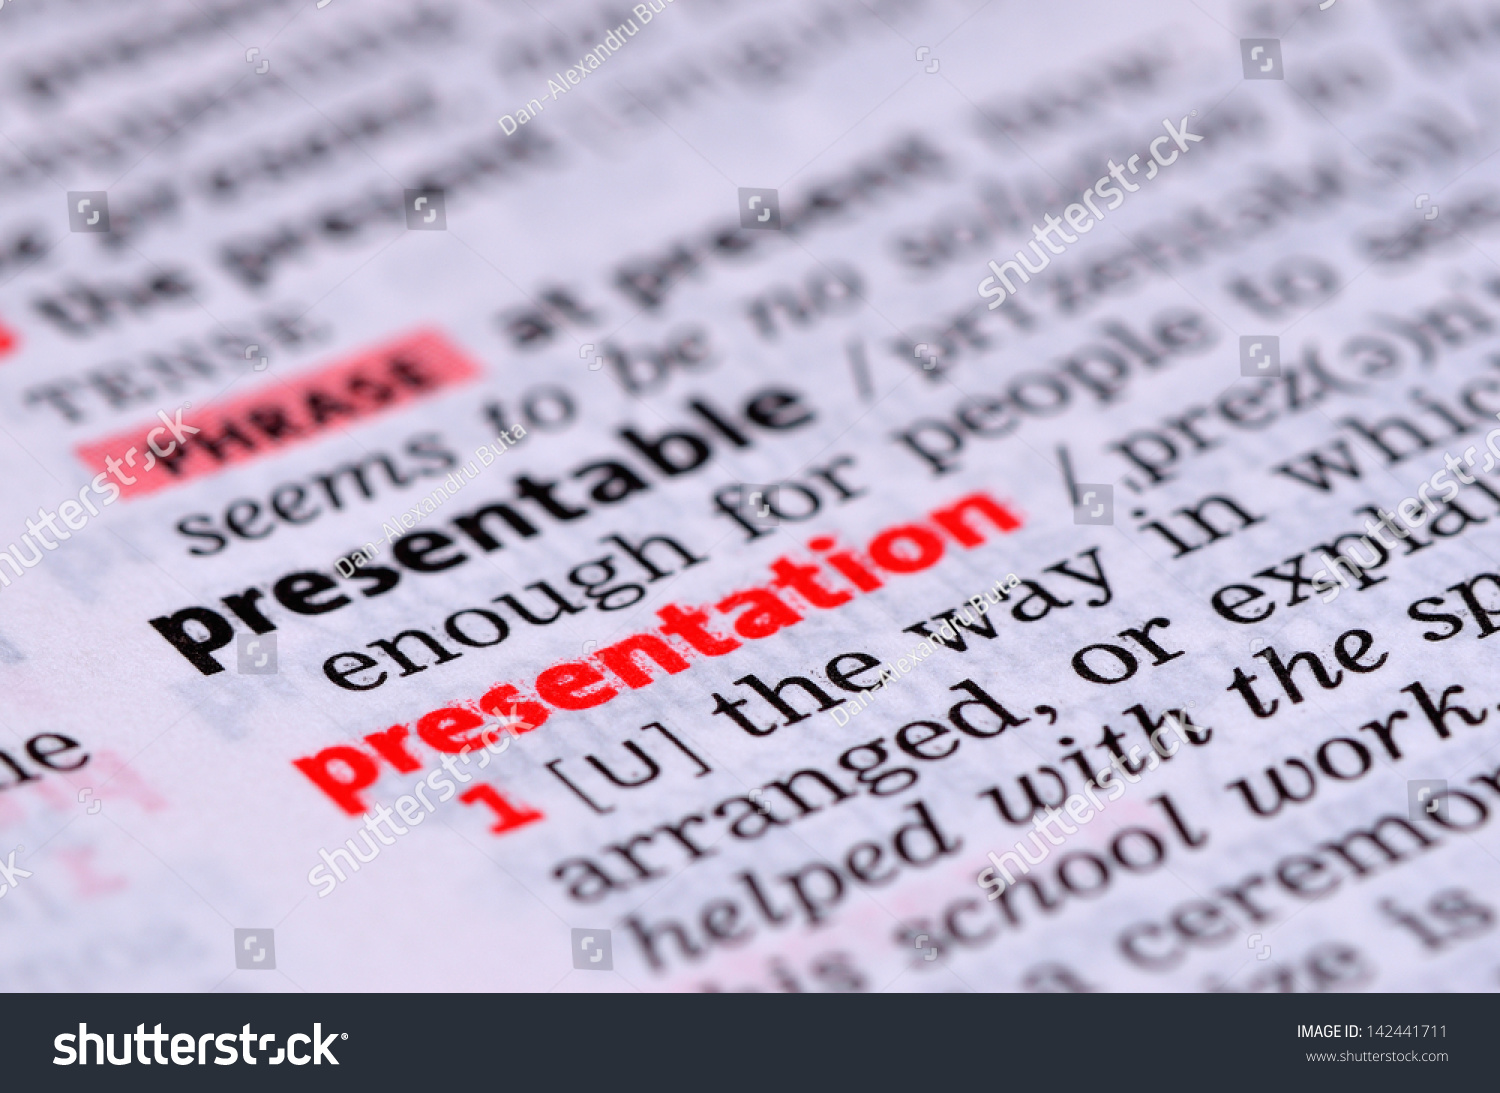 the word presentation means